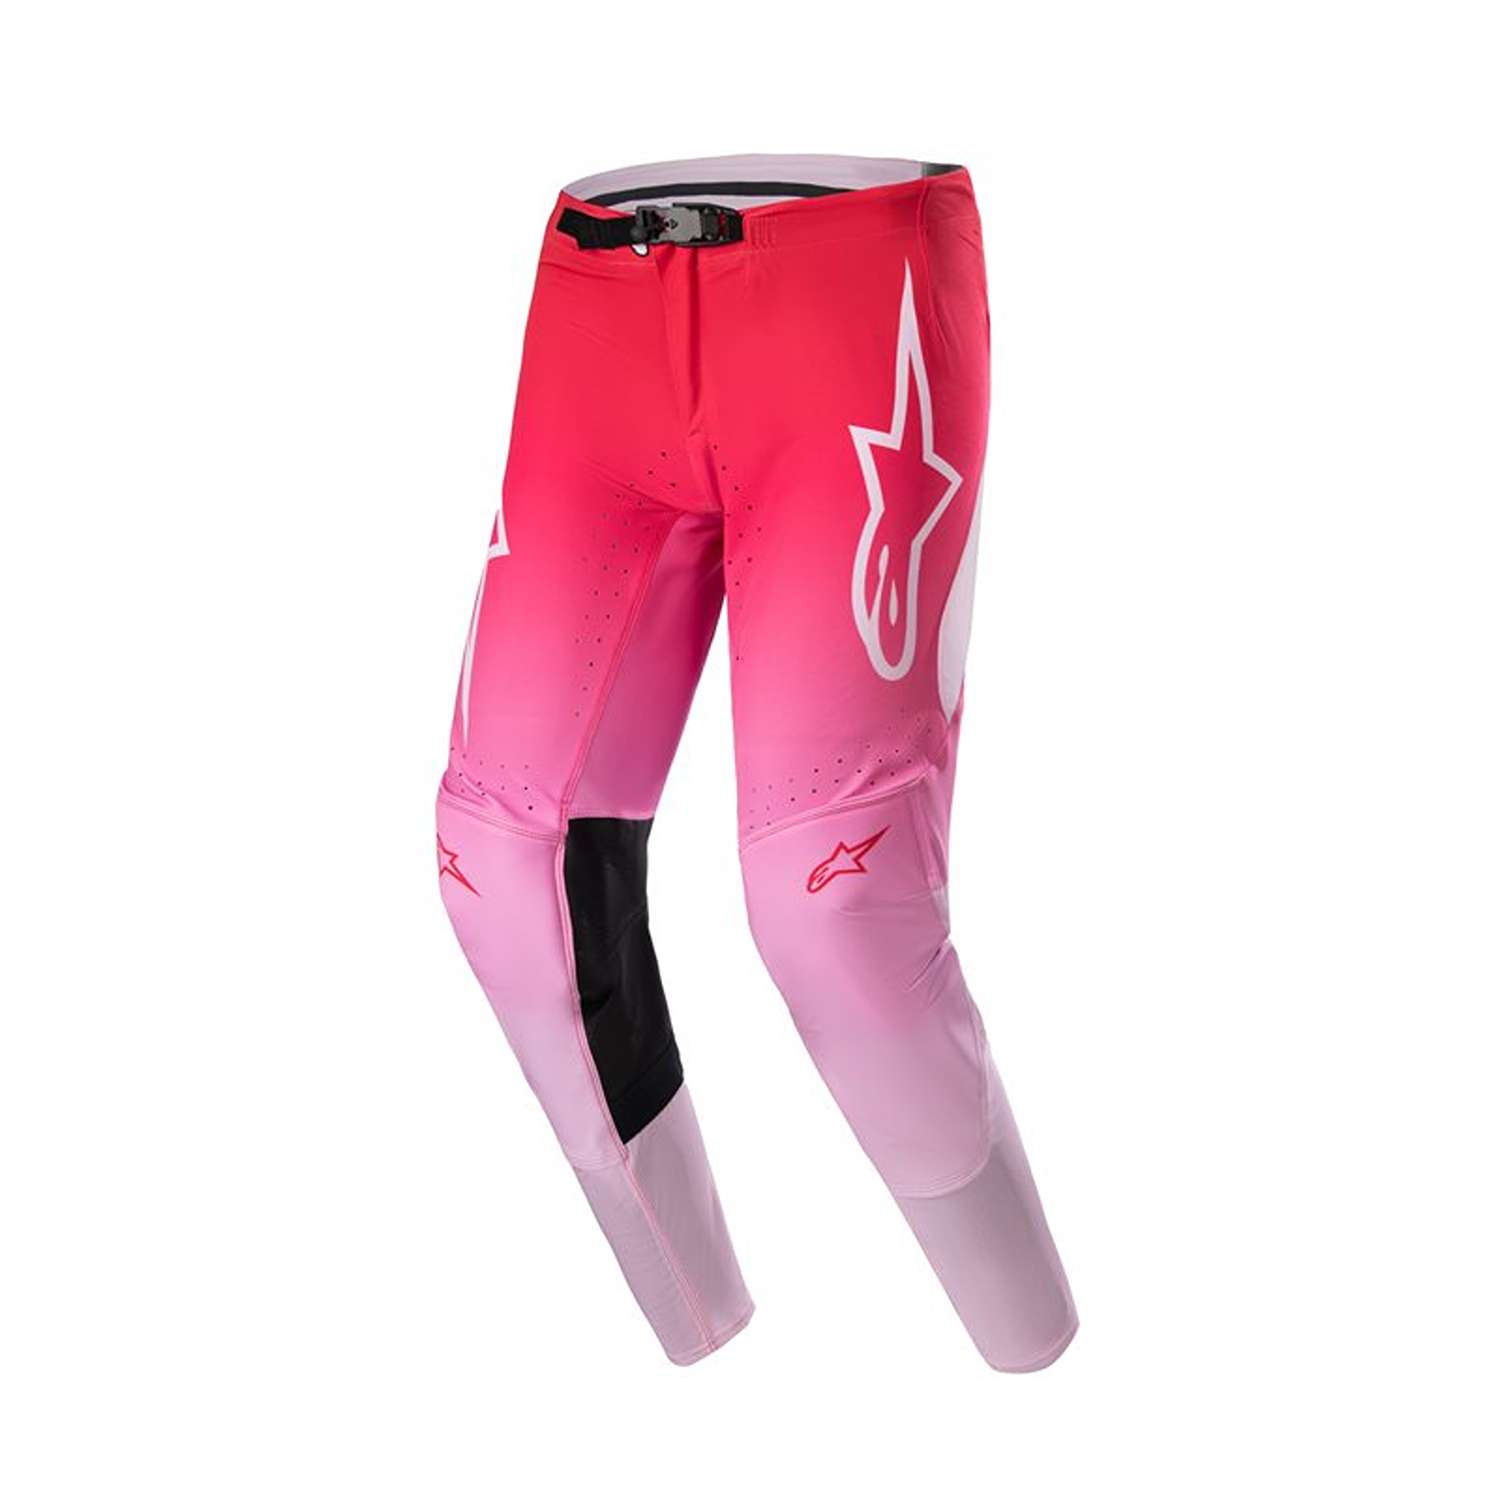 Image of Alpinestars Supertech Dade Pants Red Berry Lilac Size 40 EN